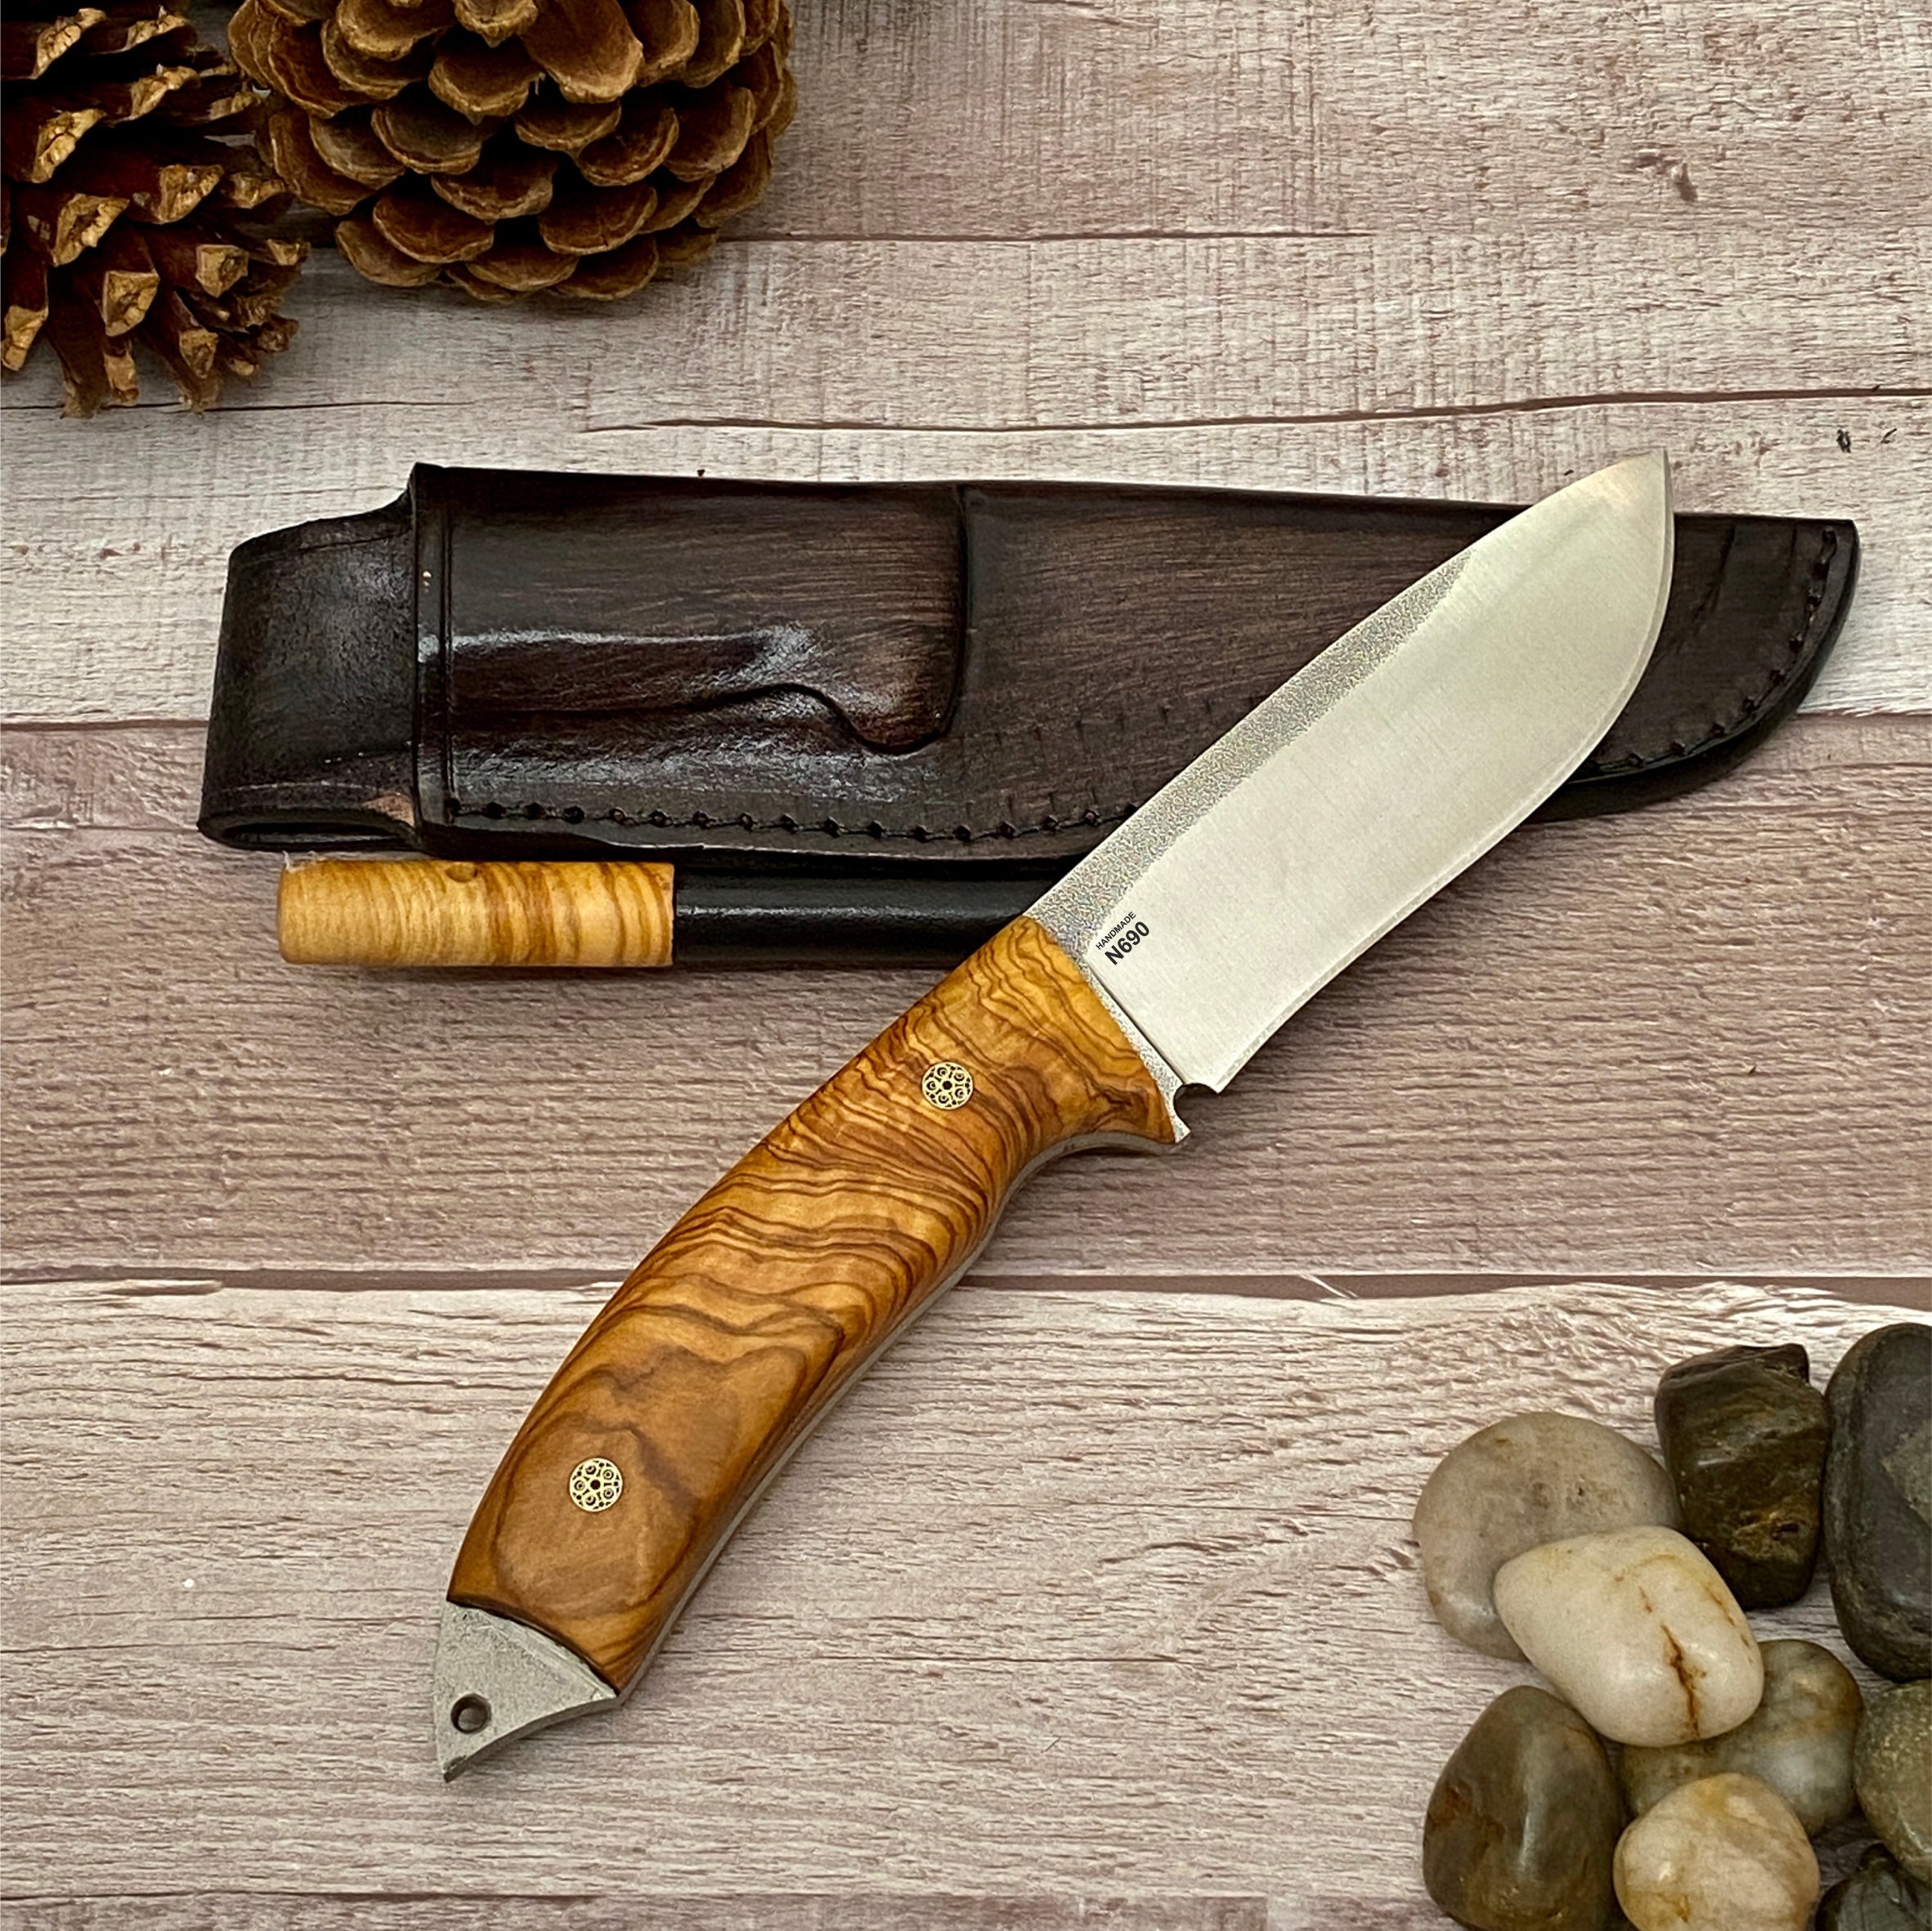 Bloomhouse 5 Inch Utility Knife made with Olive Wood and German